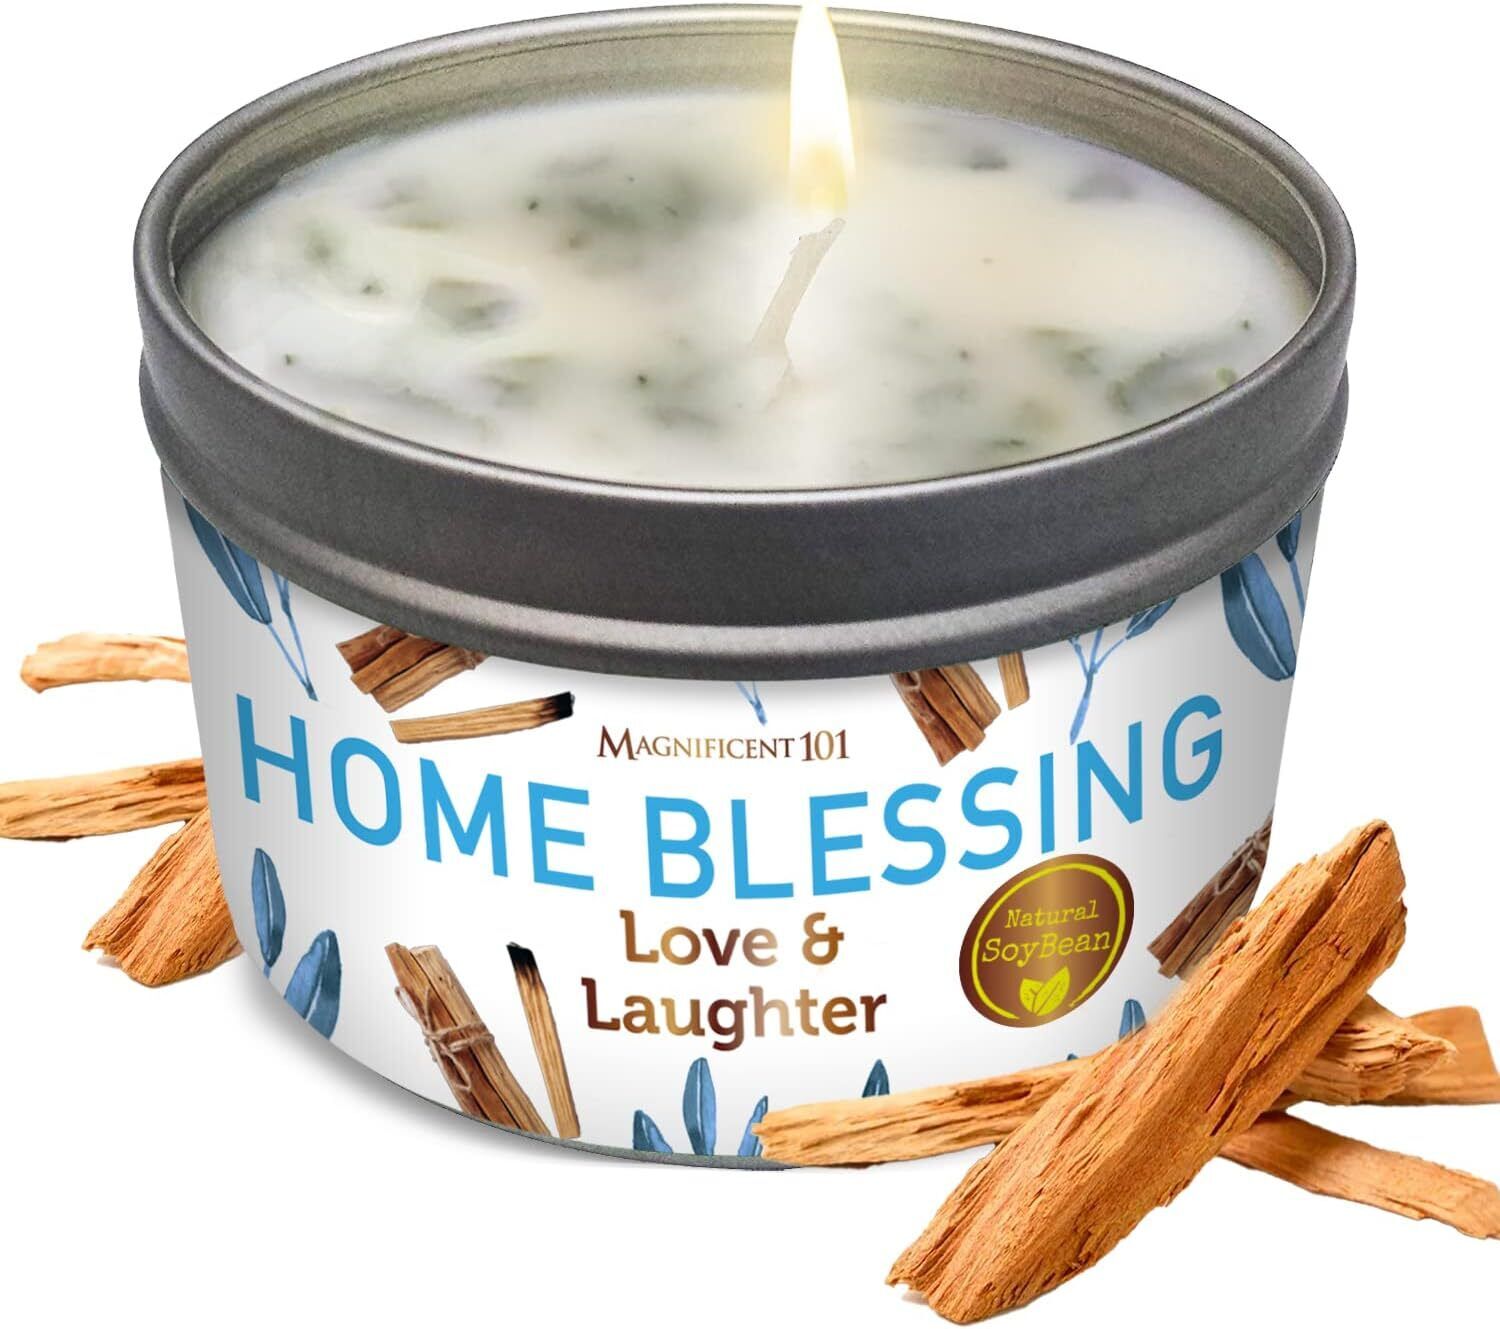 Magnificent 101 Long-Lasting Home Blessing - Love & Laughter Cream 